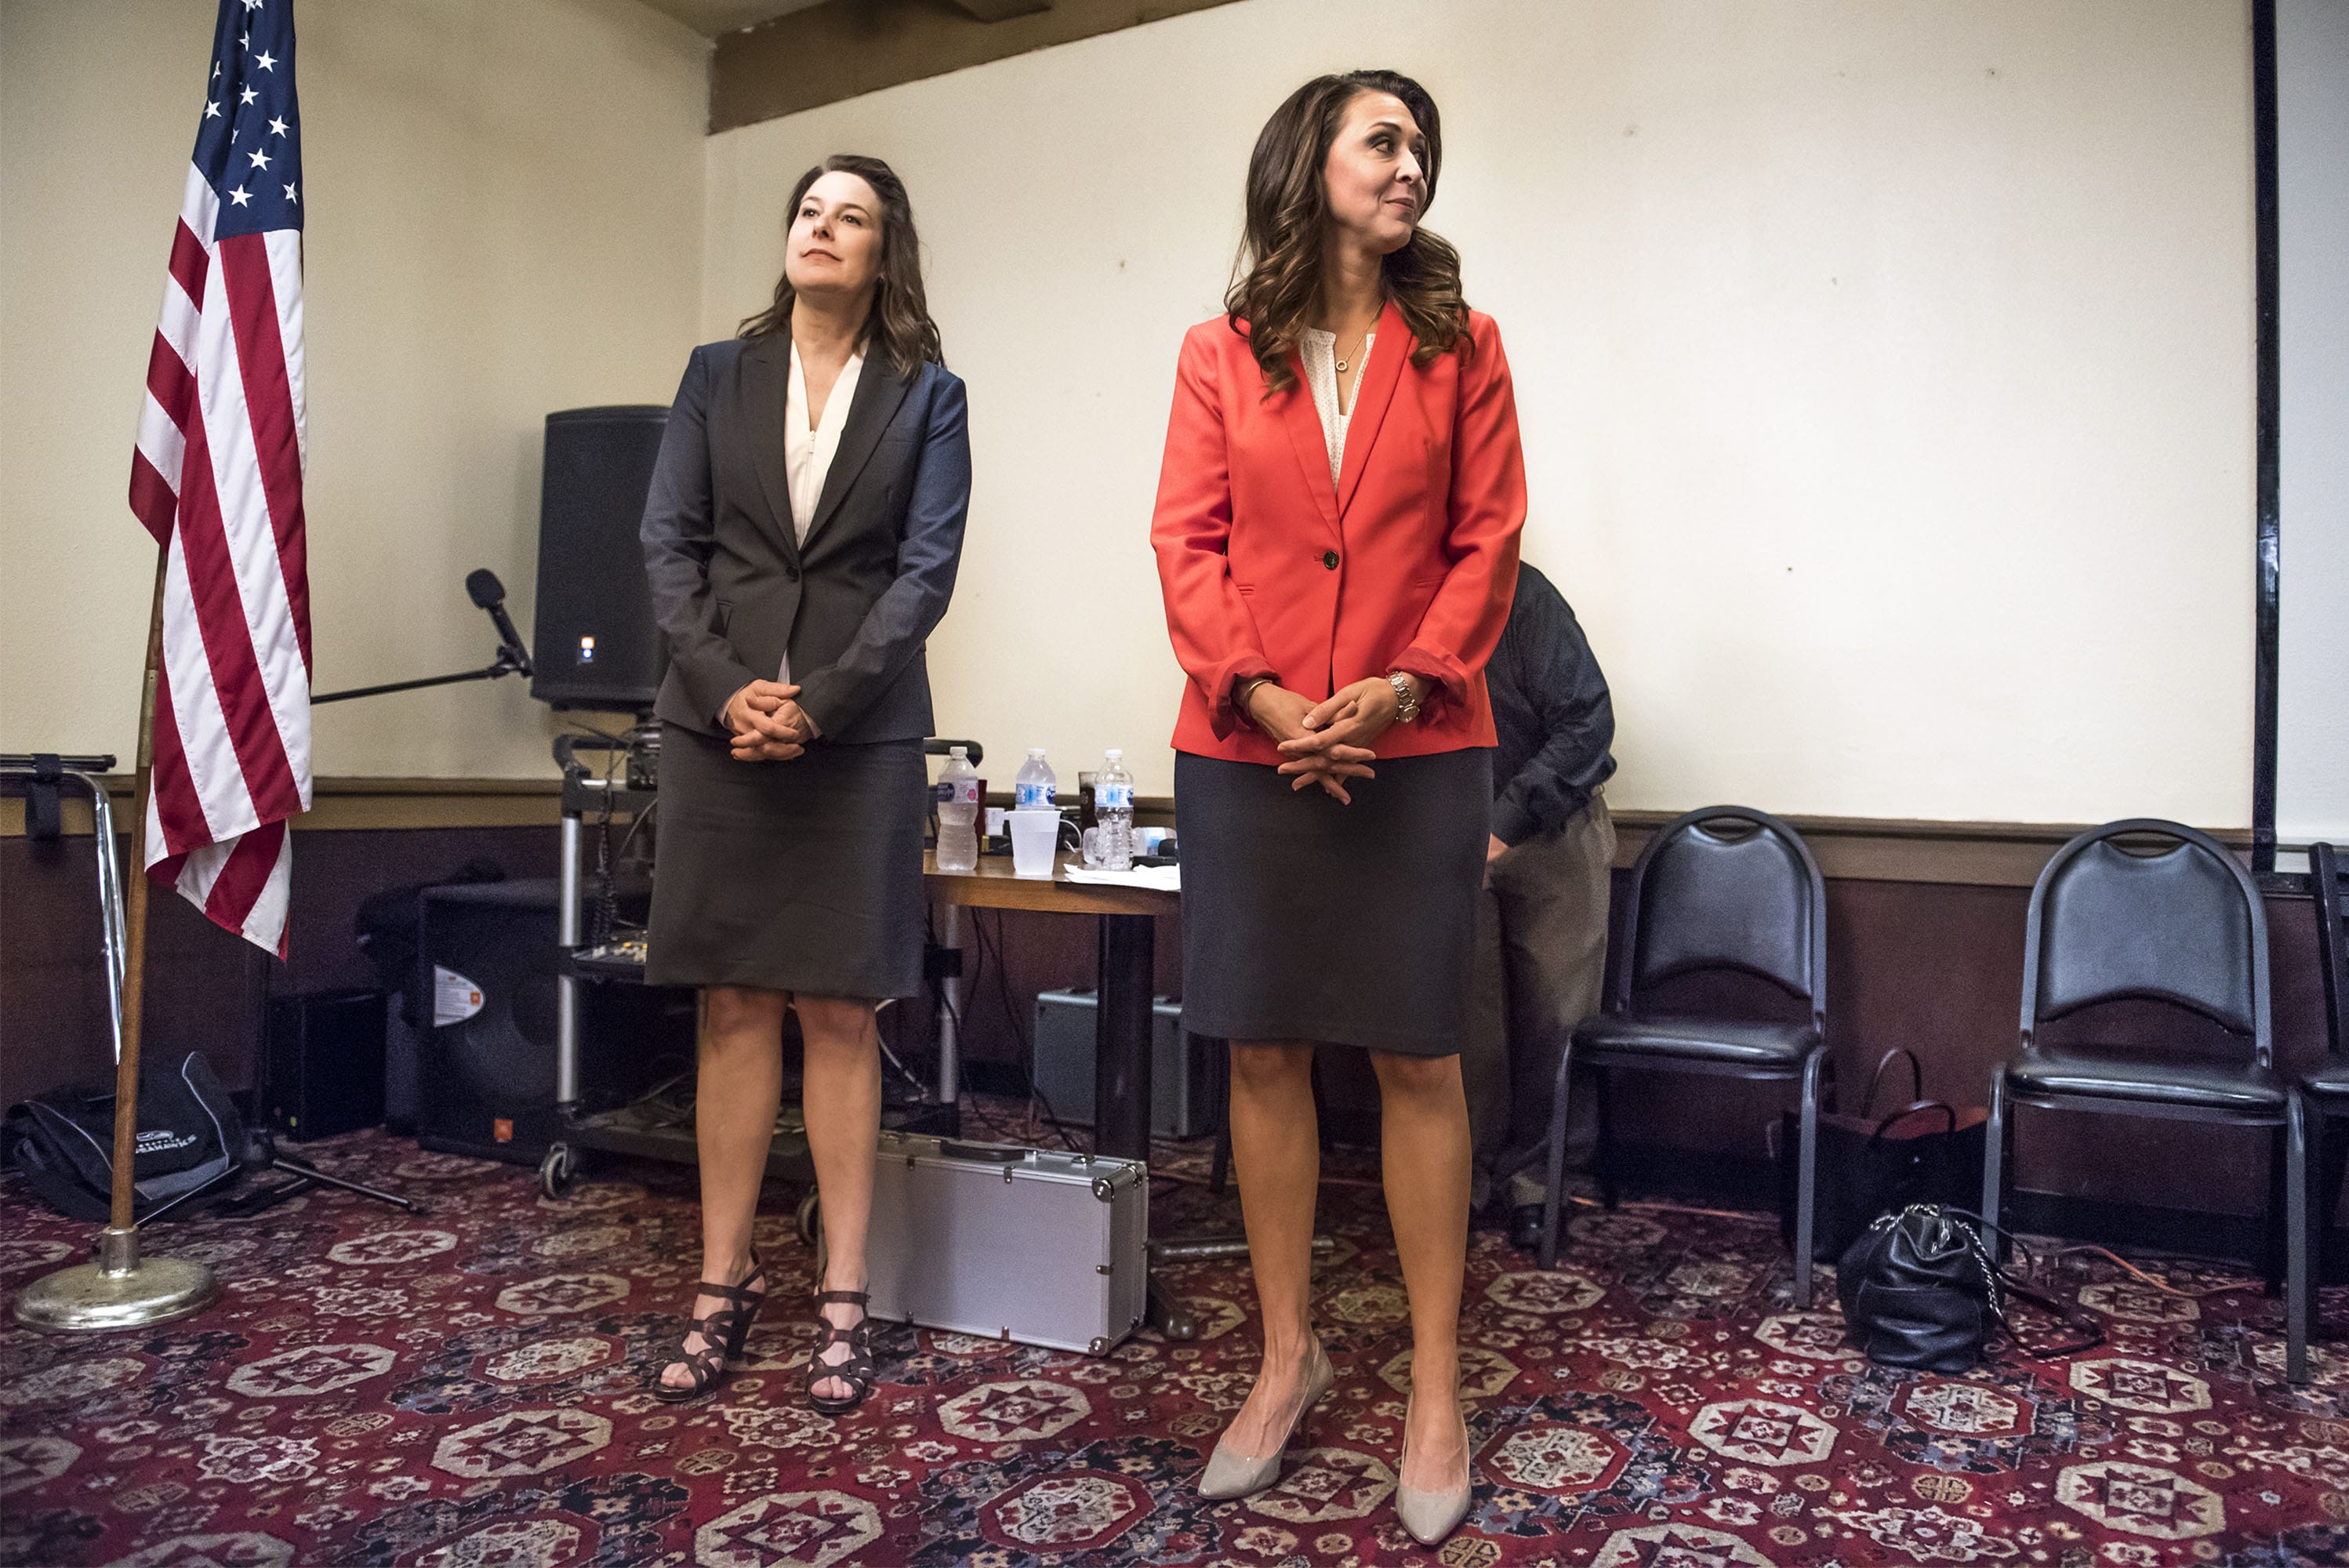 Candidate Carolyn Long, left, and Incumbent U.S. Rep. Jaime Herrera Beutler, R-Battle Ground, wait for the beginning of the 3rd Congressional Candidate Forum hosted by the Woodland Chamber of Commerce at the Oaktree Restaurant in Woodland on Tuesday afternoon, Sept. 18, 2018.